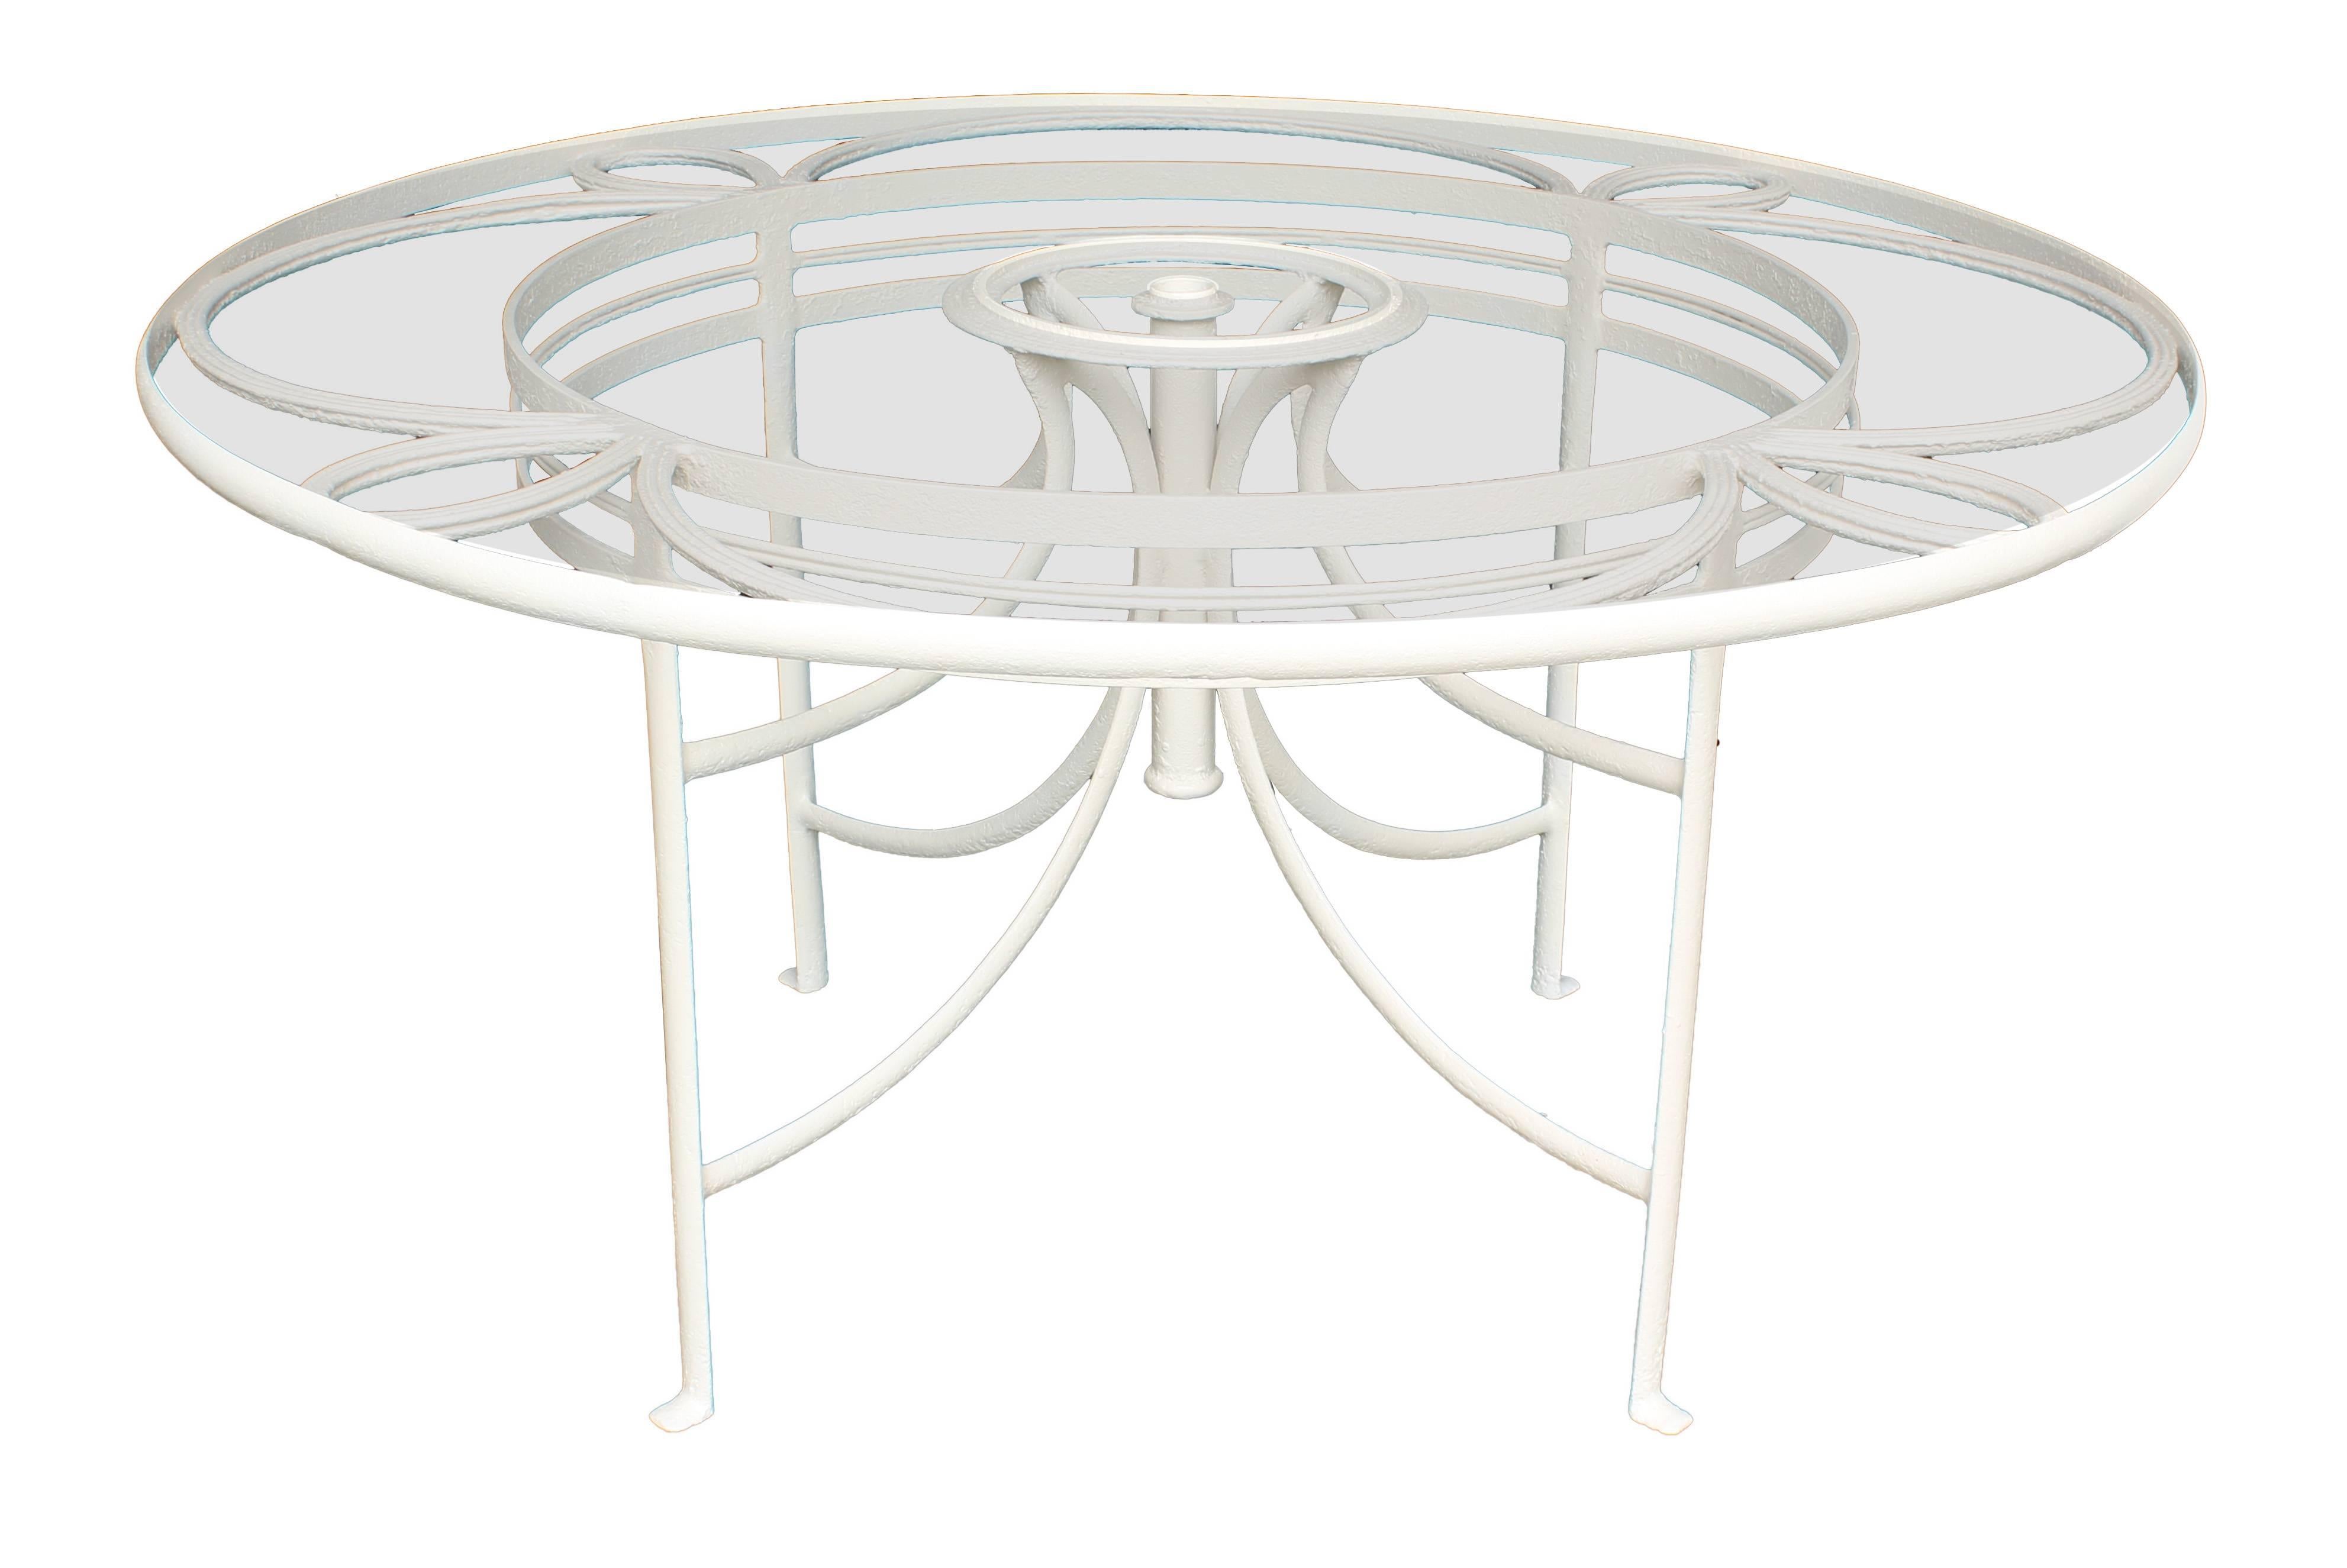 1930s French iron and glass 57 inch diameter round table for outdoor or sun room. Center tube for use with umbrella. Has been refinished with off-white outdoor paint. Purchase includes a set of 12 French wrought iron garden chairs attributed to Rene